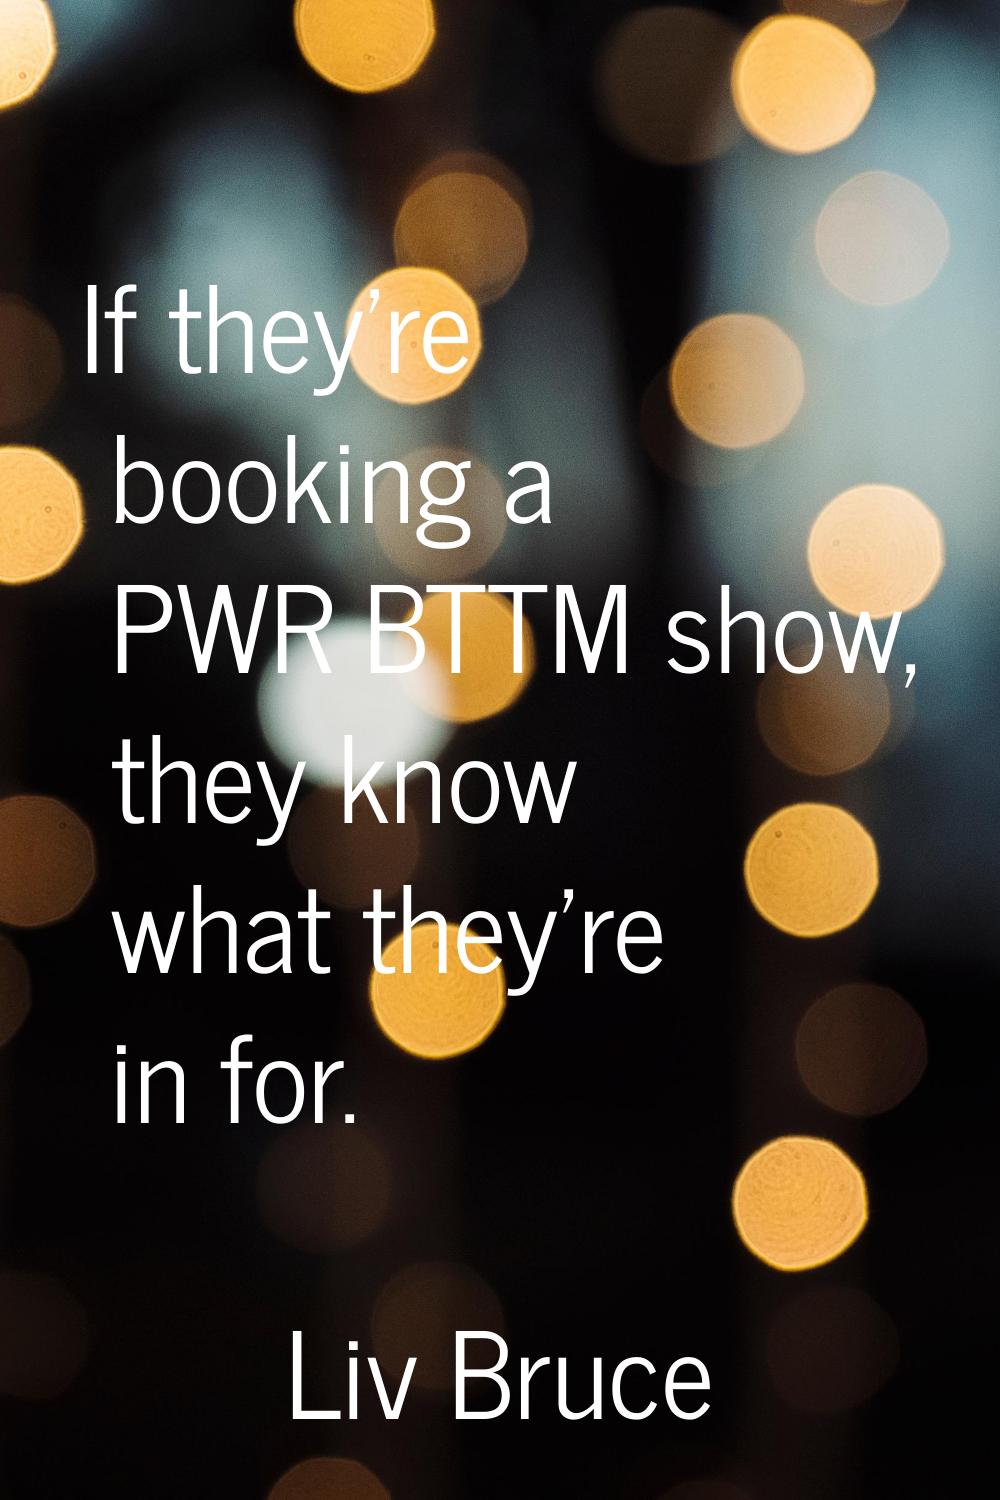 If they're booking a PWR BTTM show, they know what they're in for.